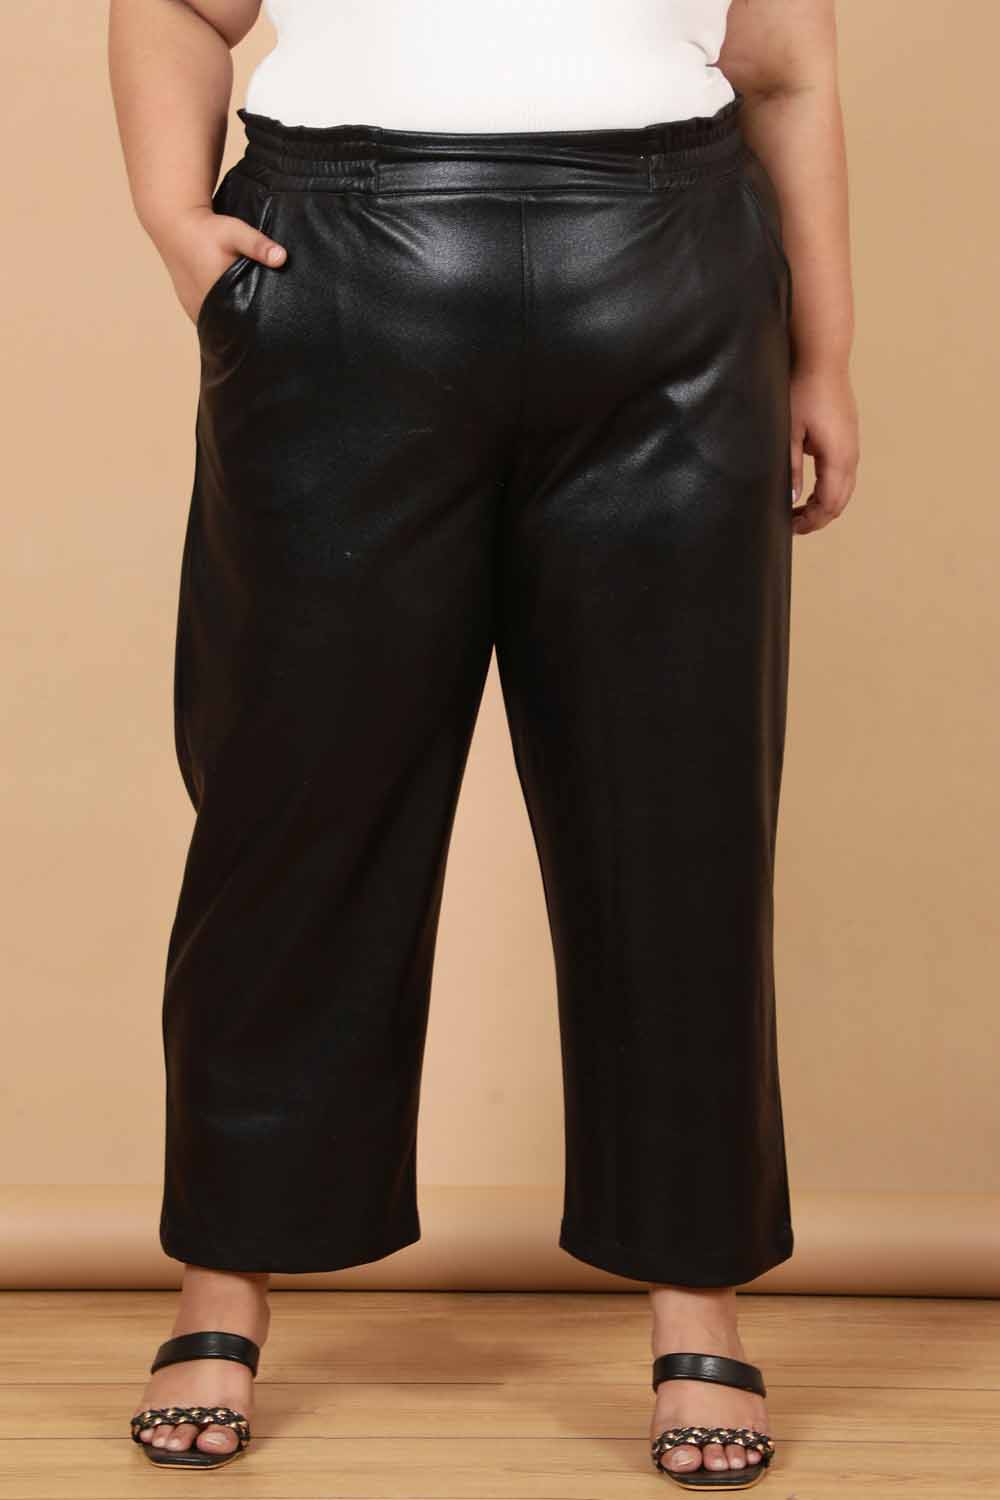 Imitation leather trousers - Black - Men | H&M IN